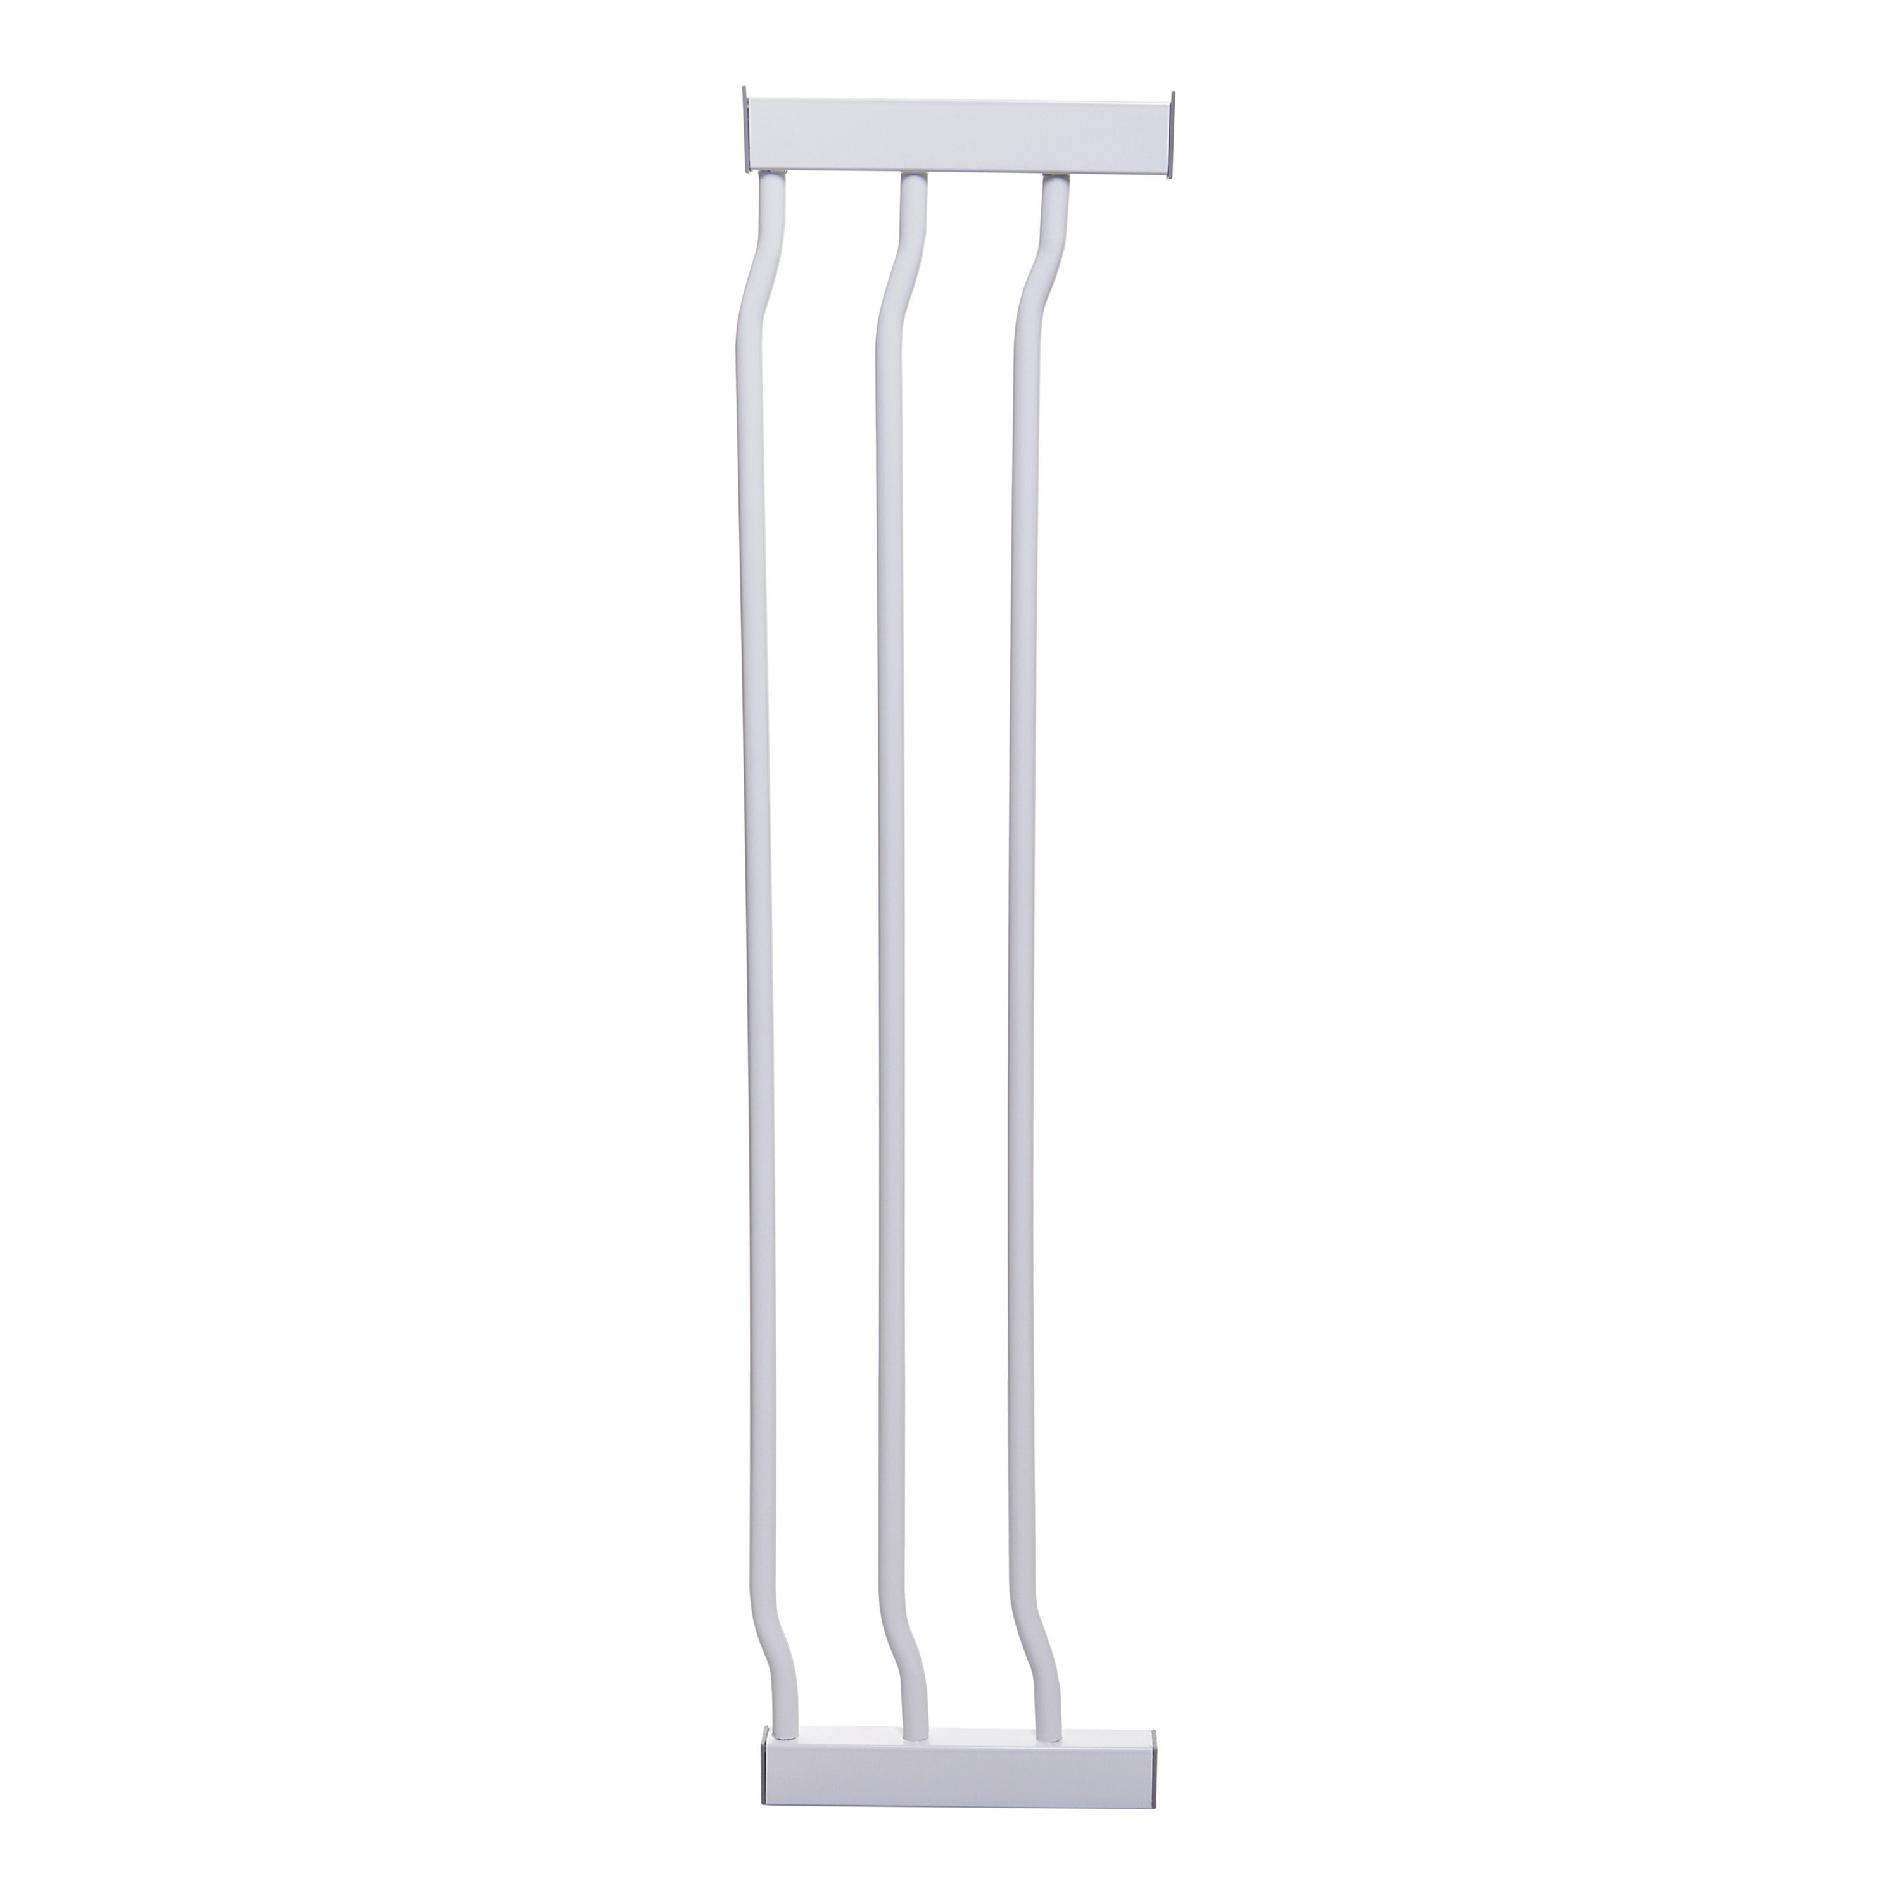 L902 7 in. Gate Extension - White